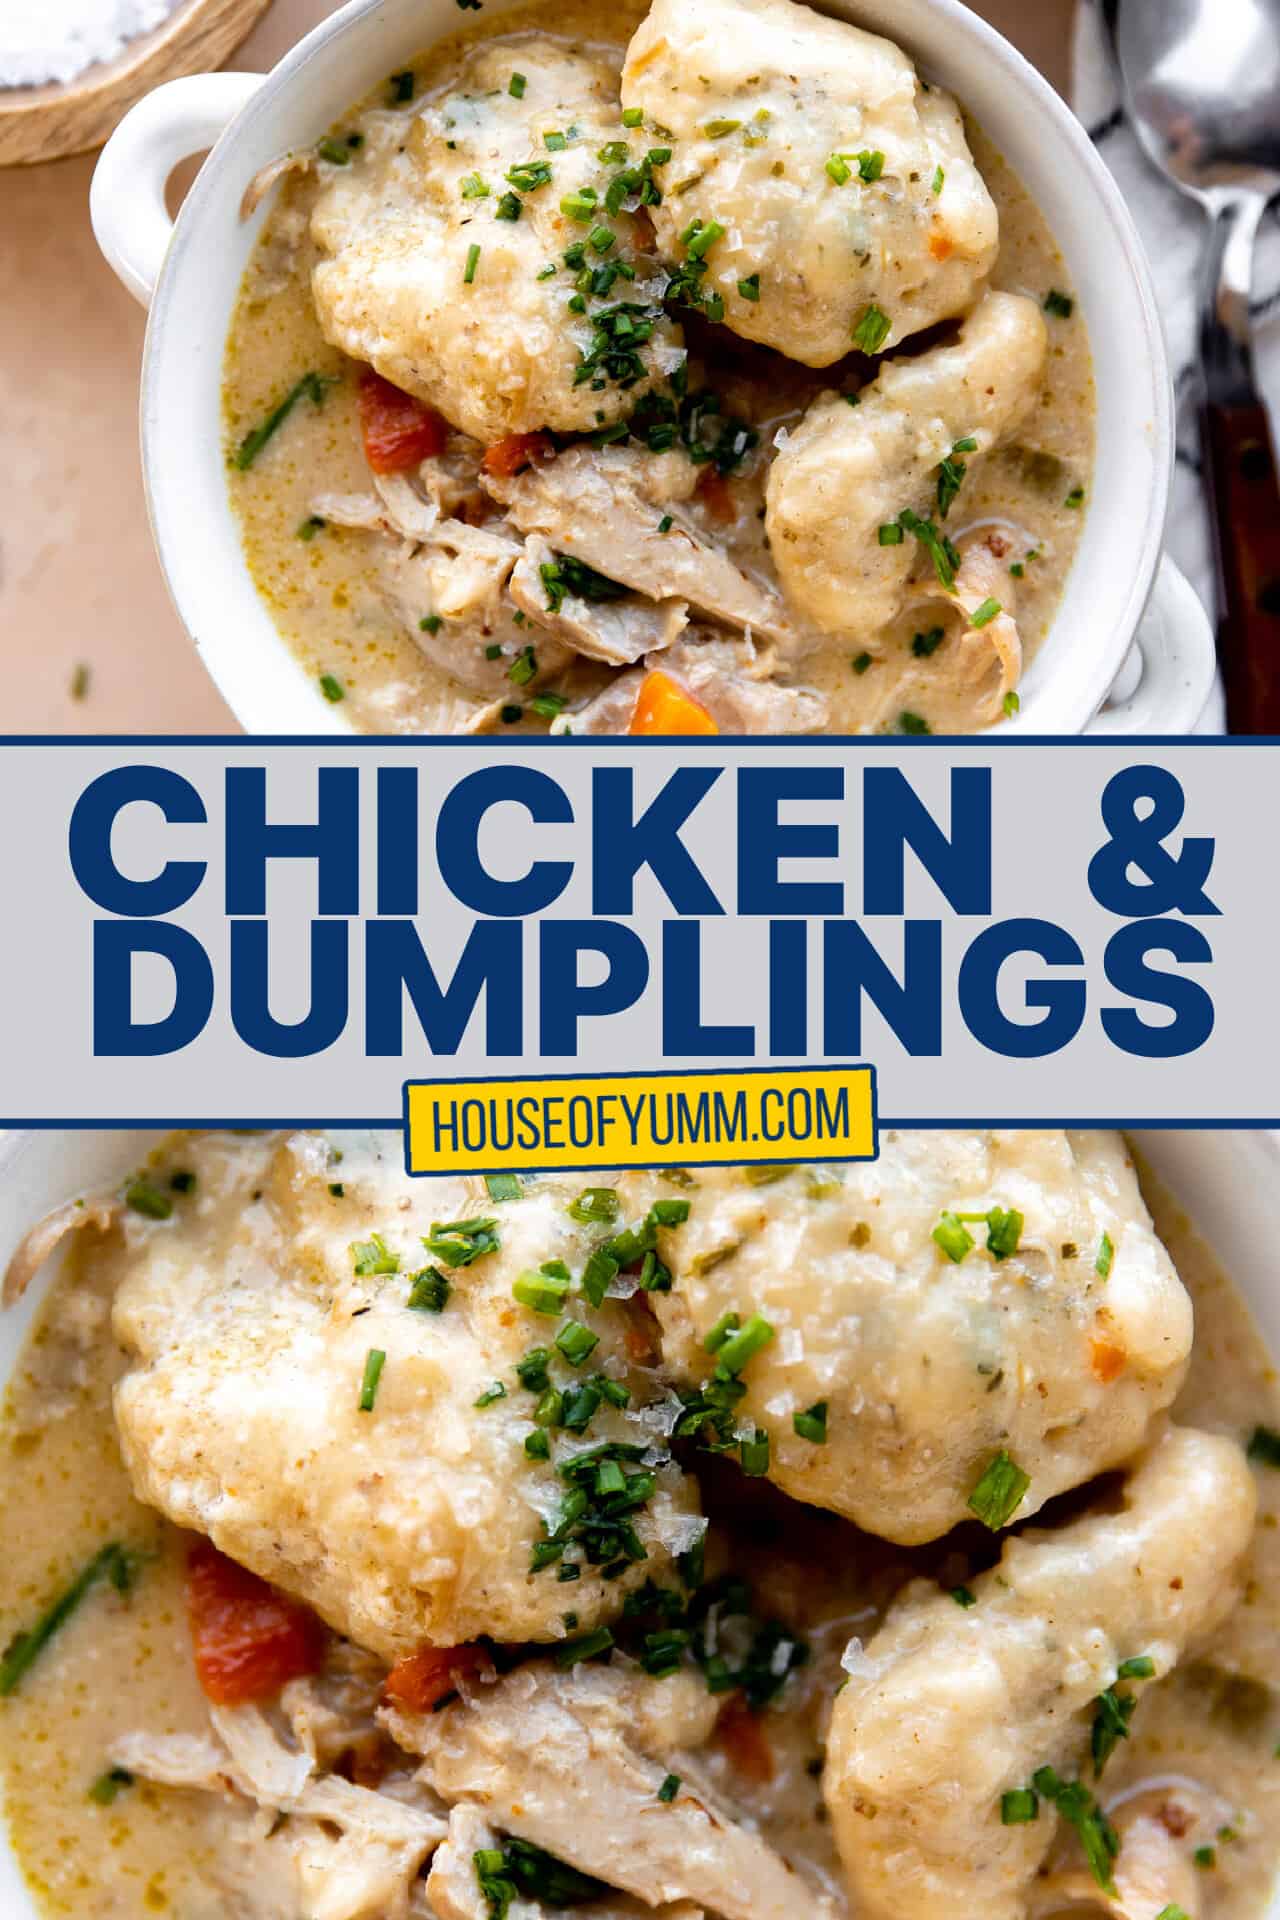 Classic Chicken and Dumplings - House of Yumm